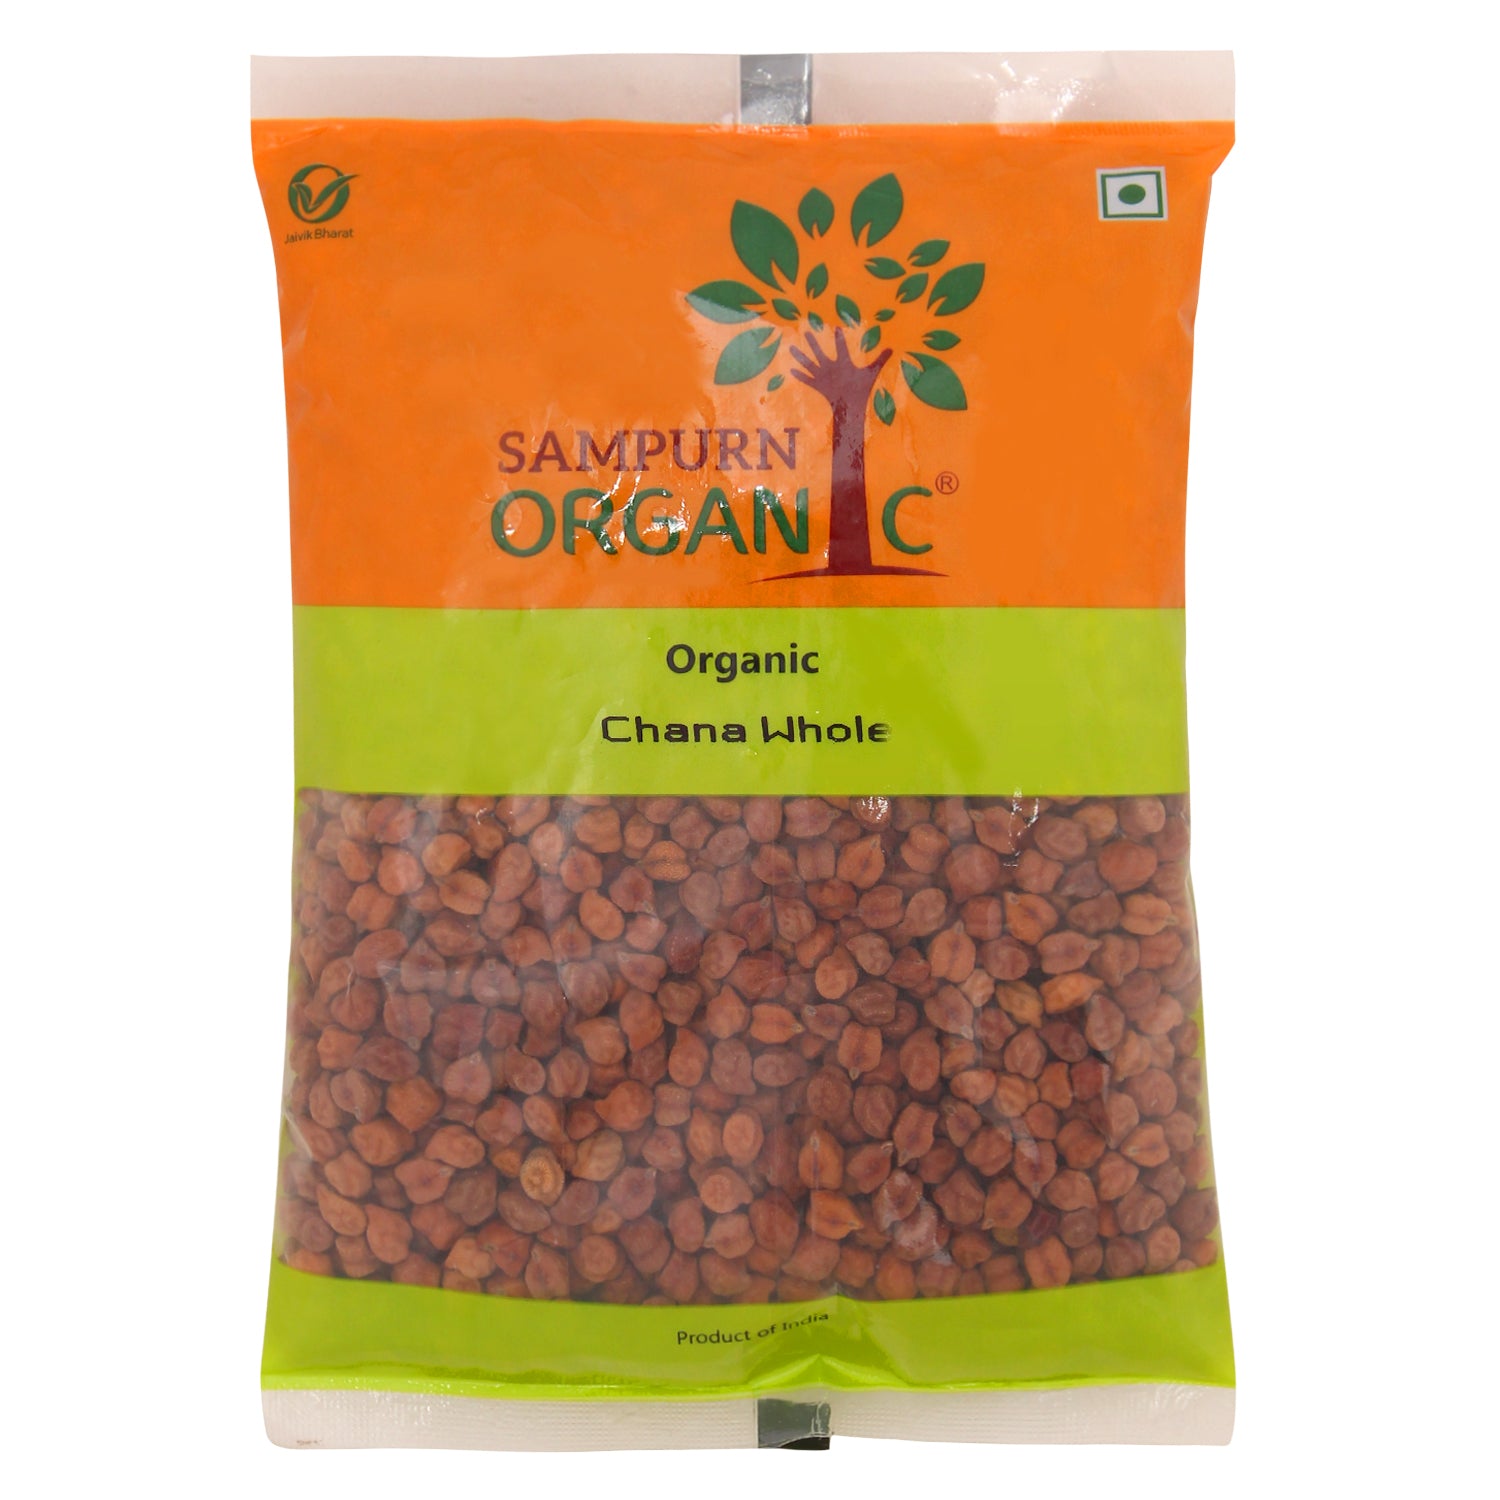 Sampurn Organic kabuli chana namkeen 500 gm 1 kg combo pack unpolished natural yellow roasted daal chhole channa pulses dal500g chickpeas lentils chick peas curry nutrition recipe split bengal gram whole flour pulses